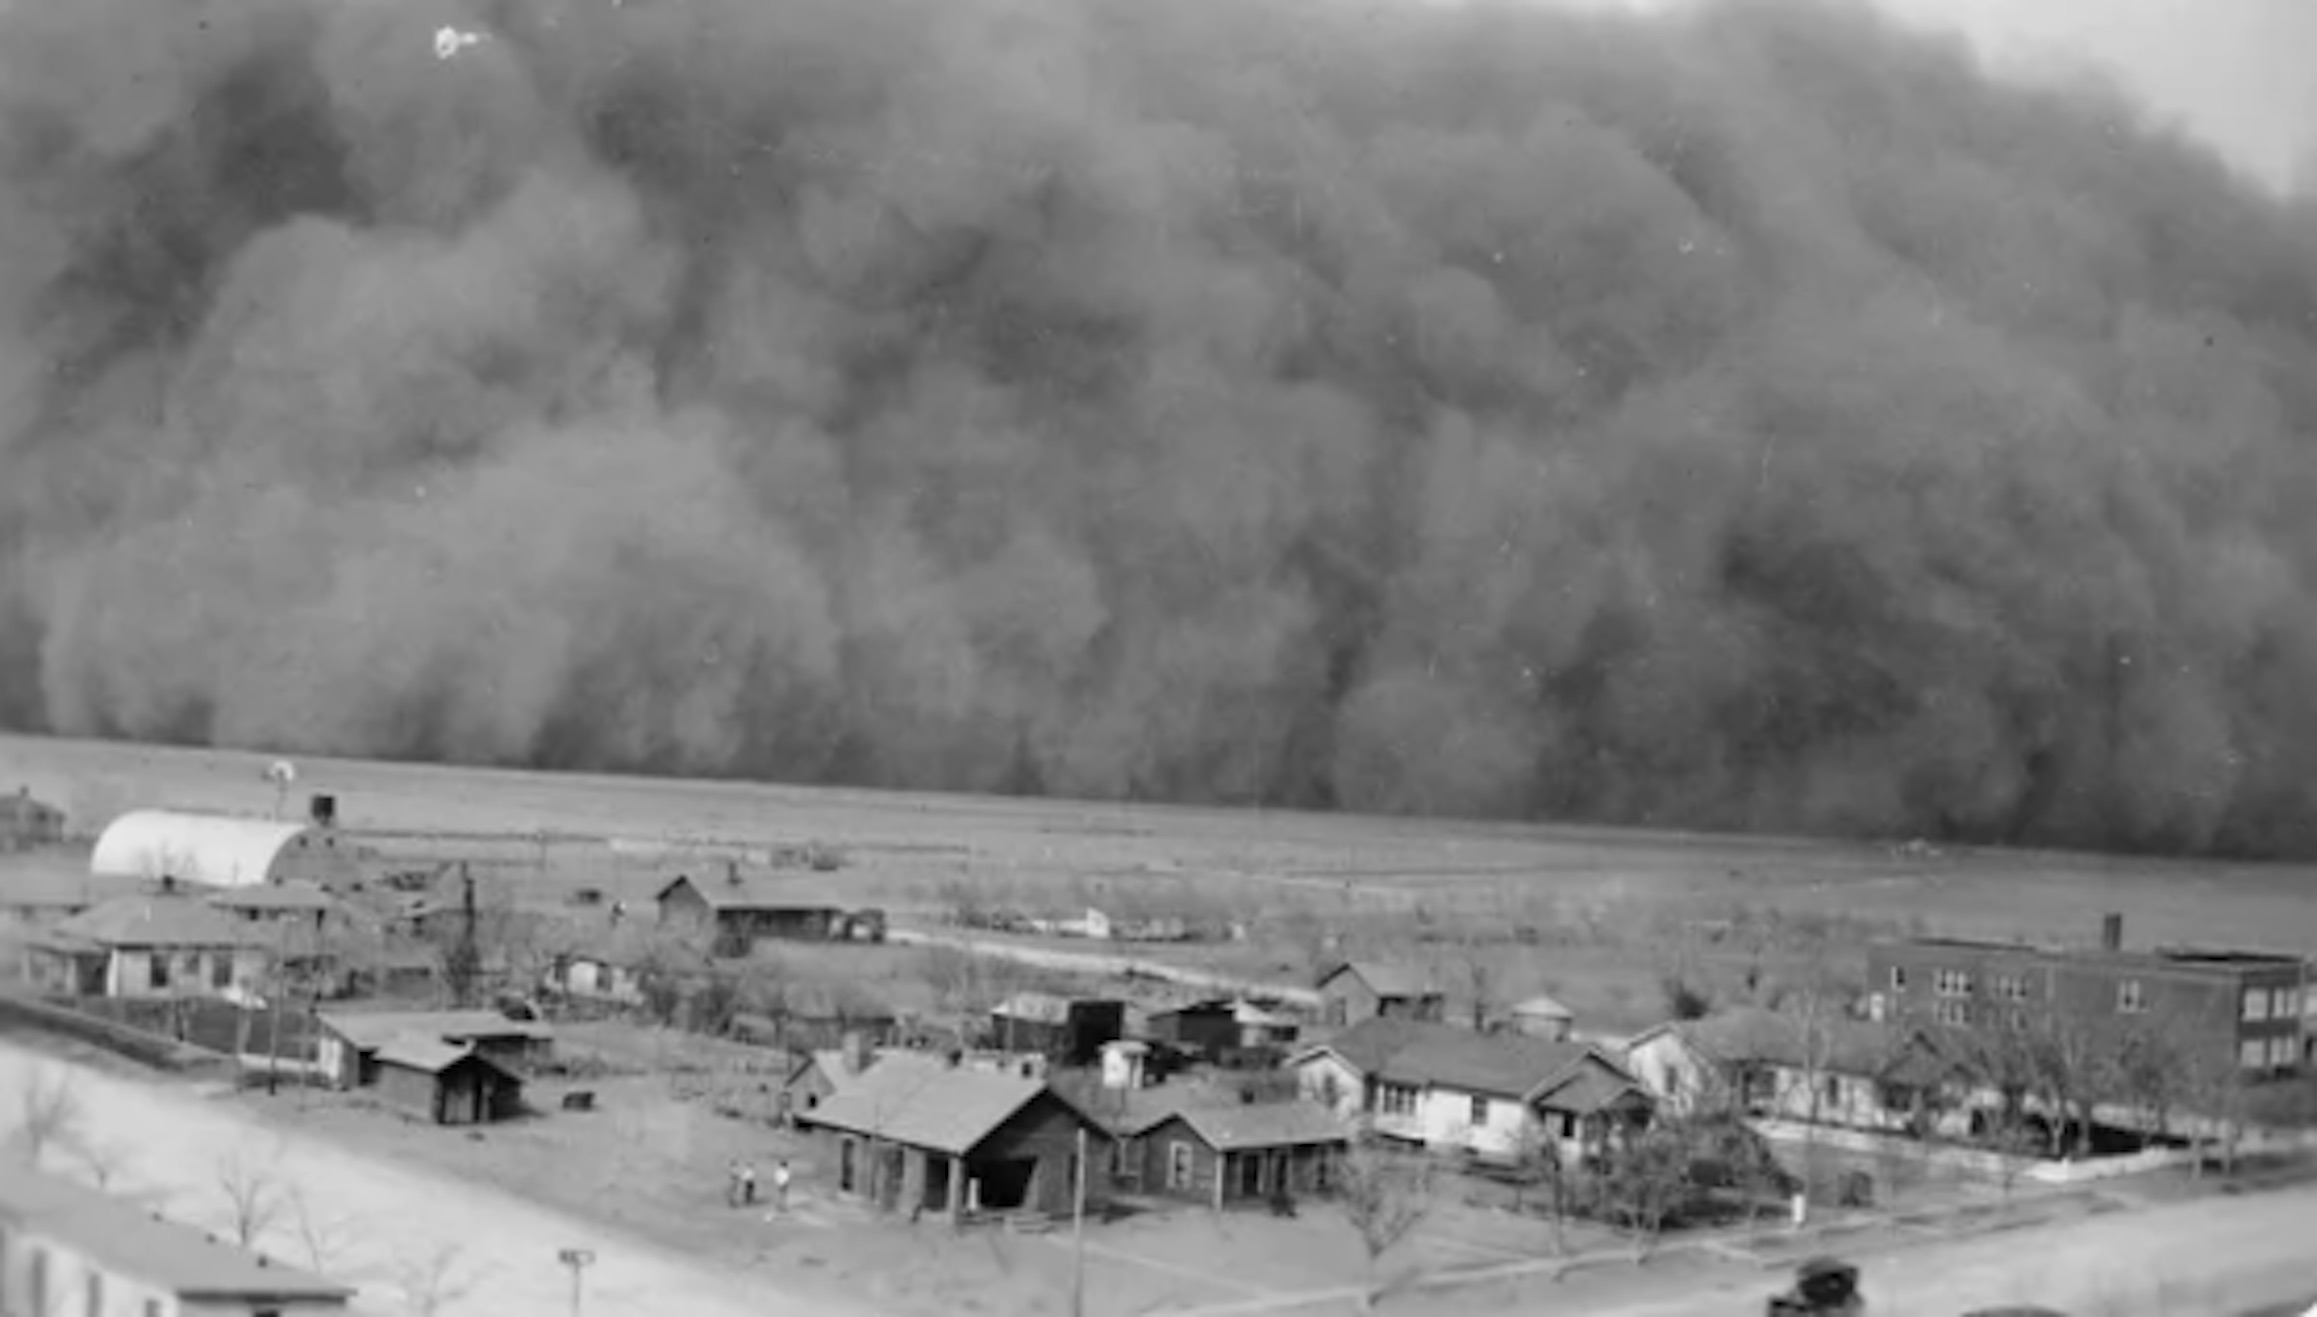 Dust storm in Rolla, Kansas (April 14, 1935) – photo courtesy of Franklin D. Roosevelt Presidential Library and Museum